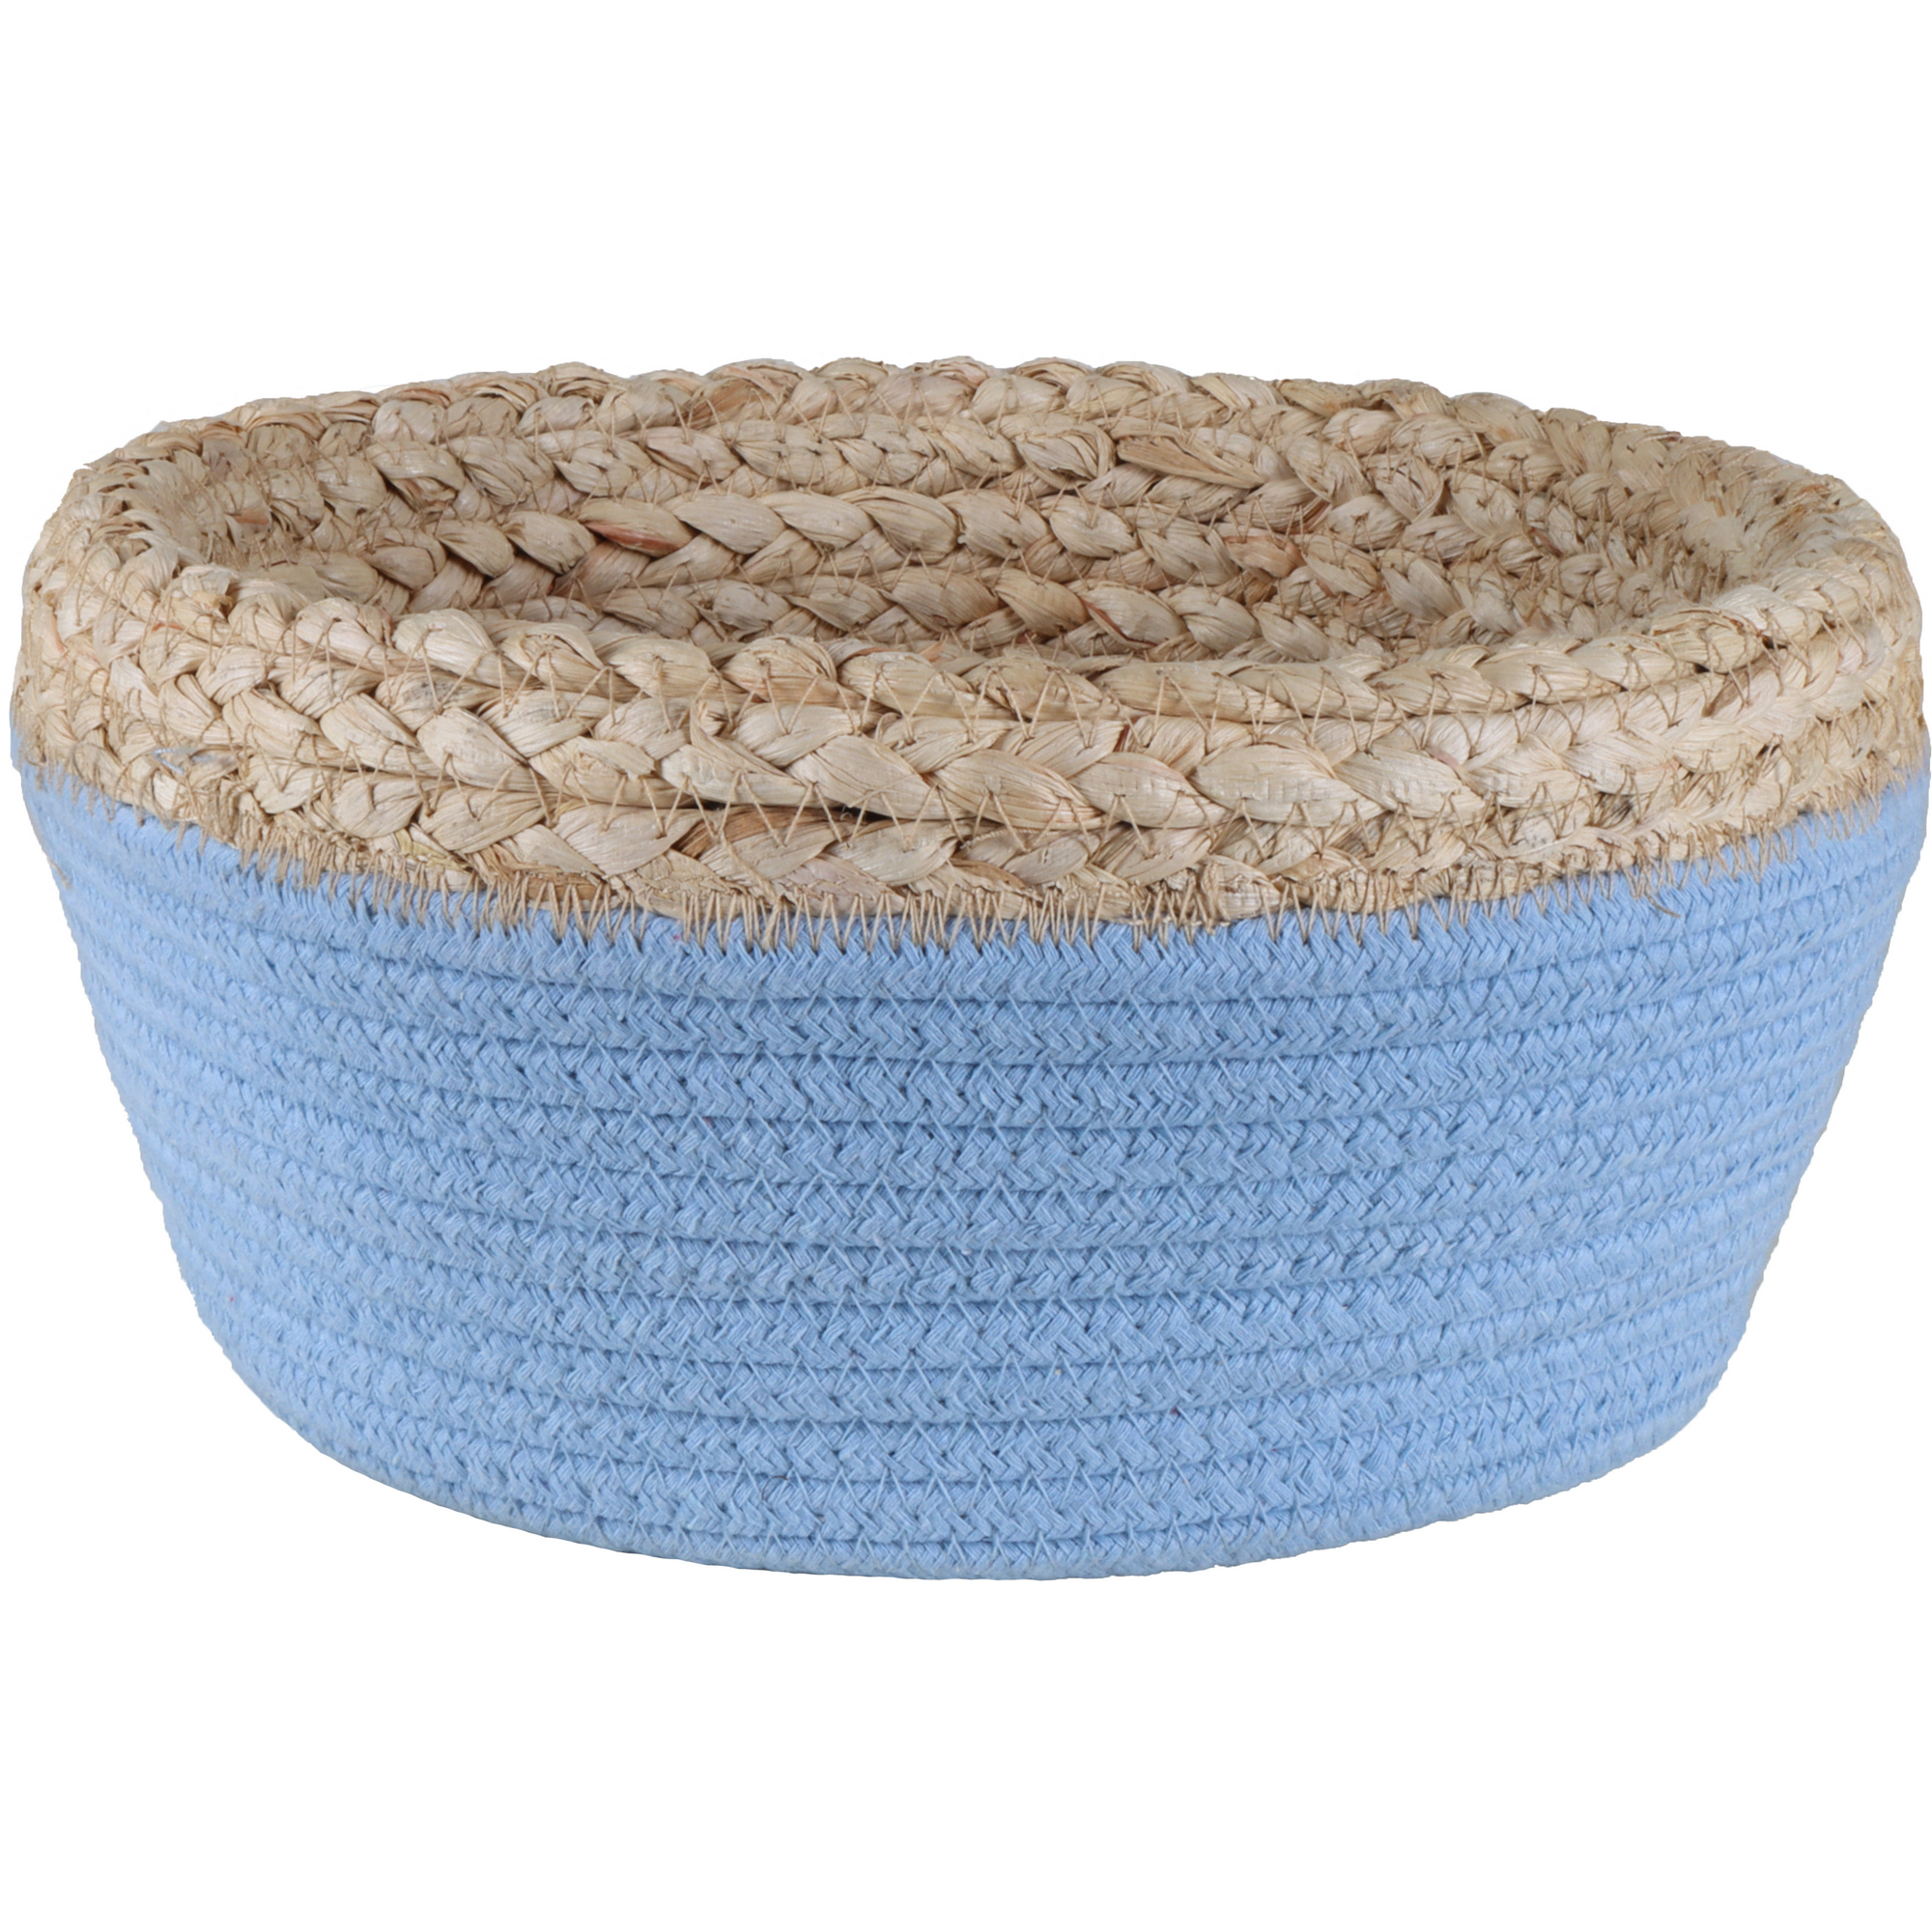 Pflanzkorb natur-blau Baumwolle / Seegras 32/40 x 32 cm + product picture